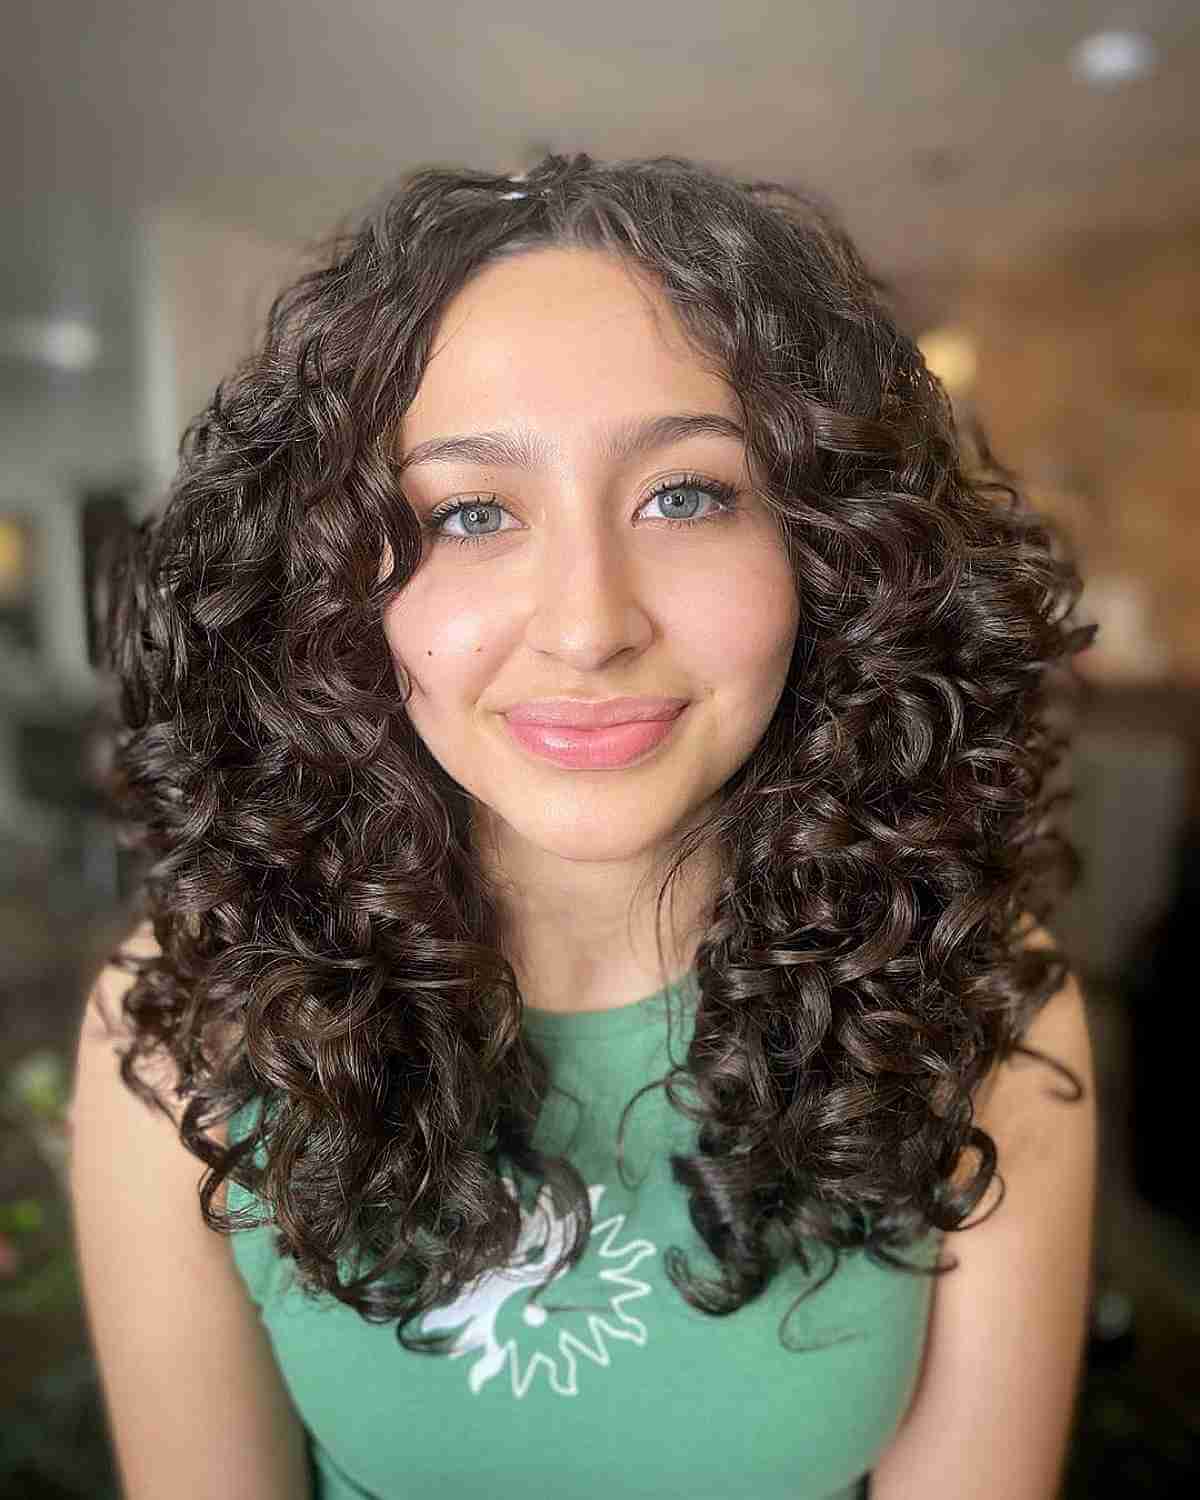 Slimming Center Parted Medium Hair with Layered Curls for Round Faces